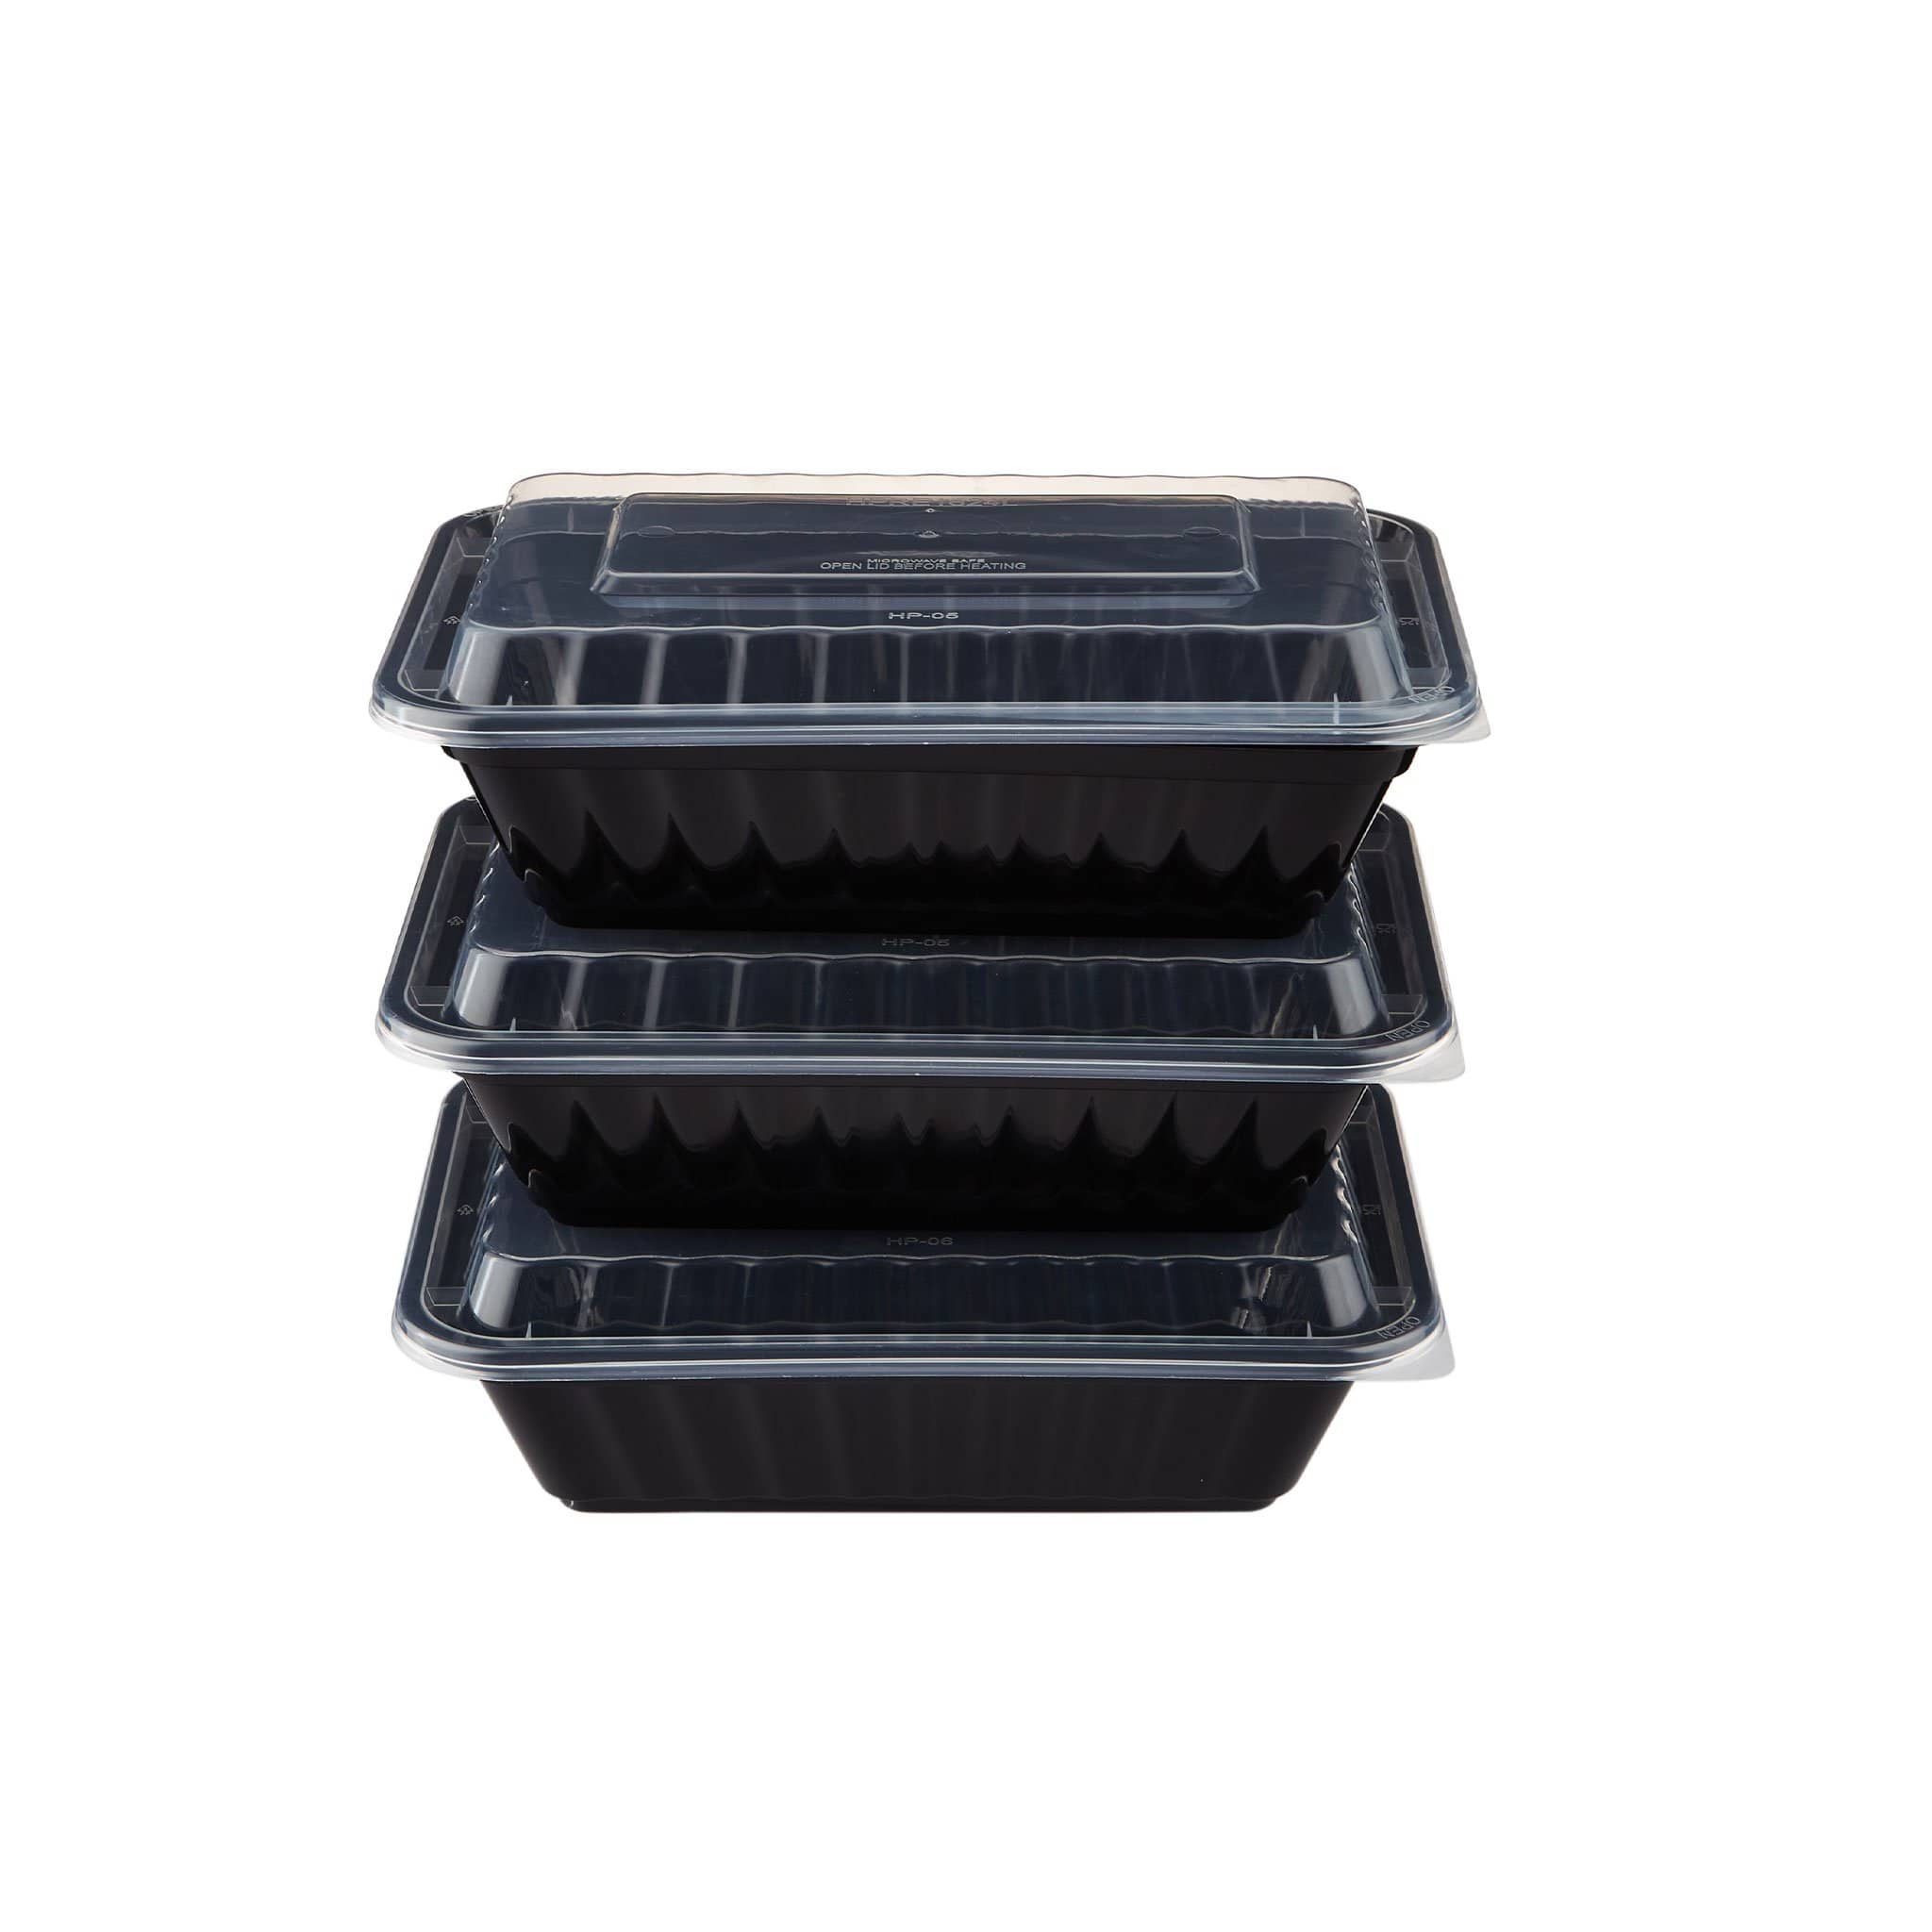 Black Base Rectangular Container 24 Oz 300 Pieces - Hotpack Global